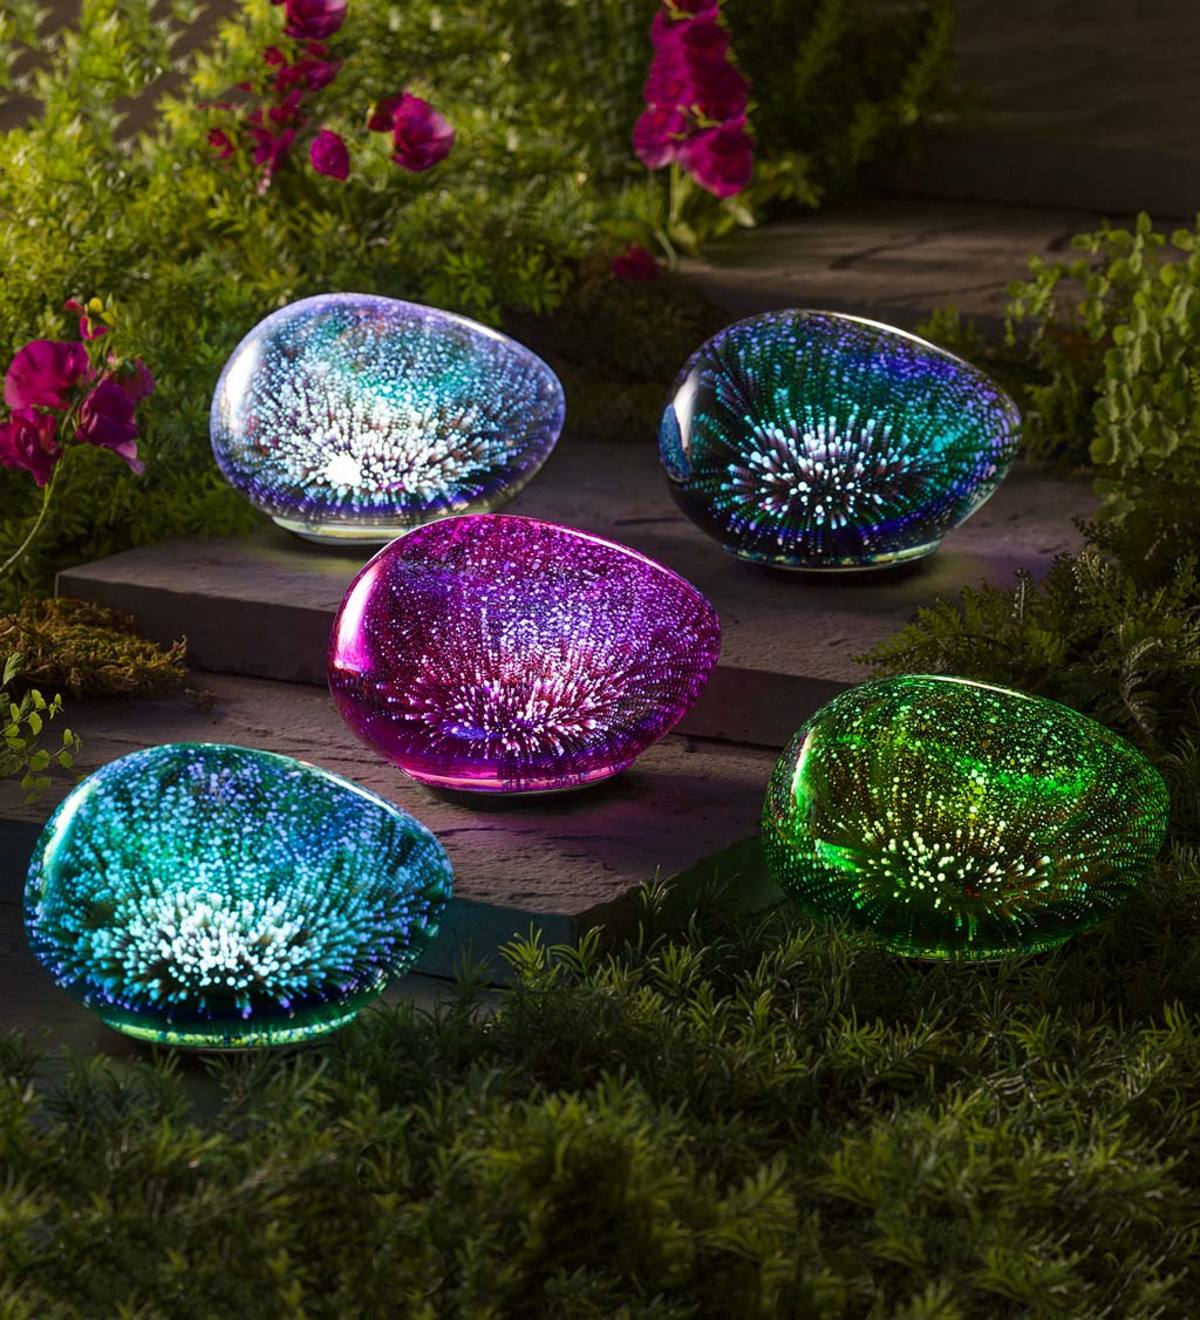 These Glow In the Dark Illuminated Planters Will Make Your